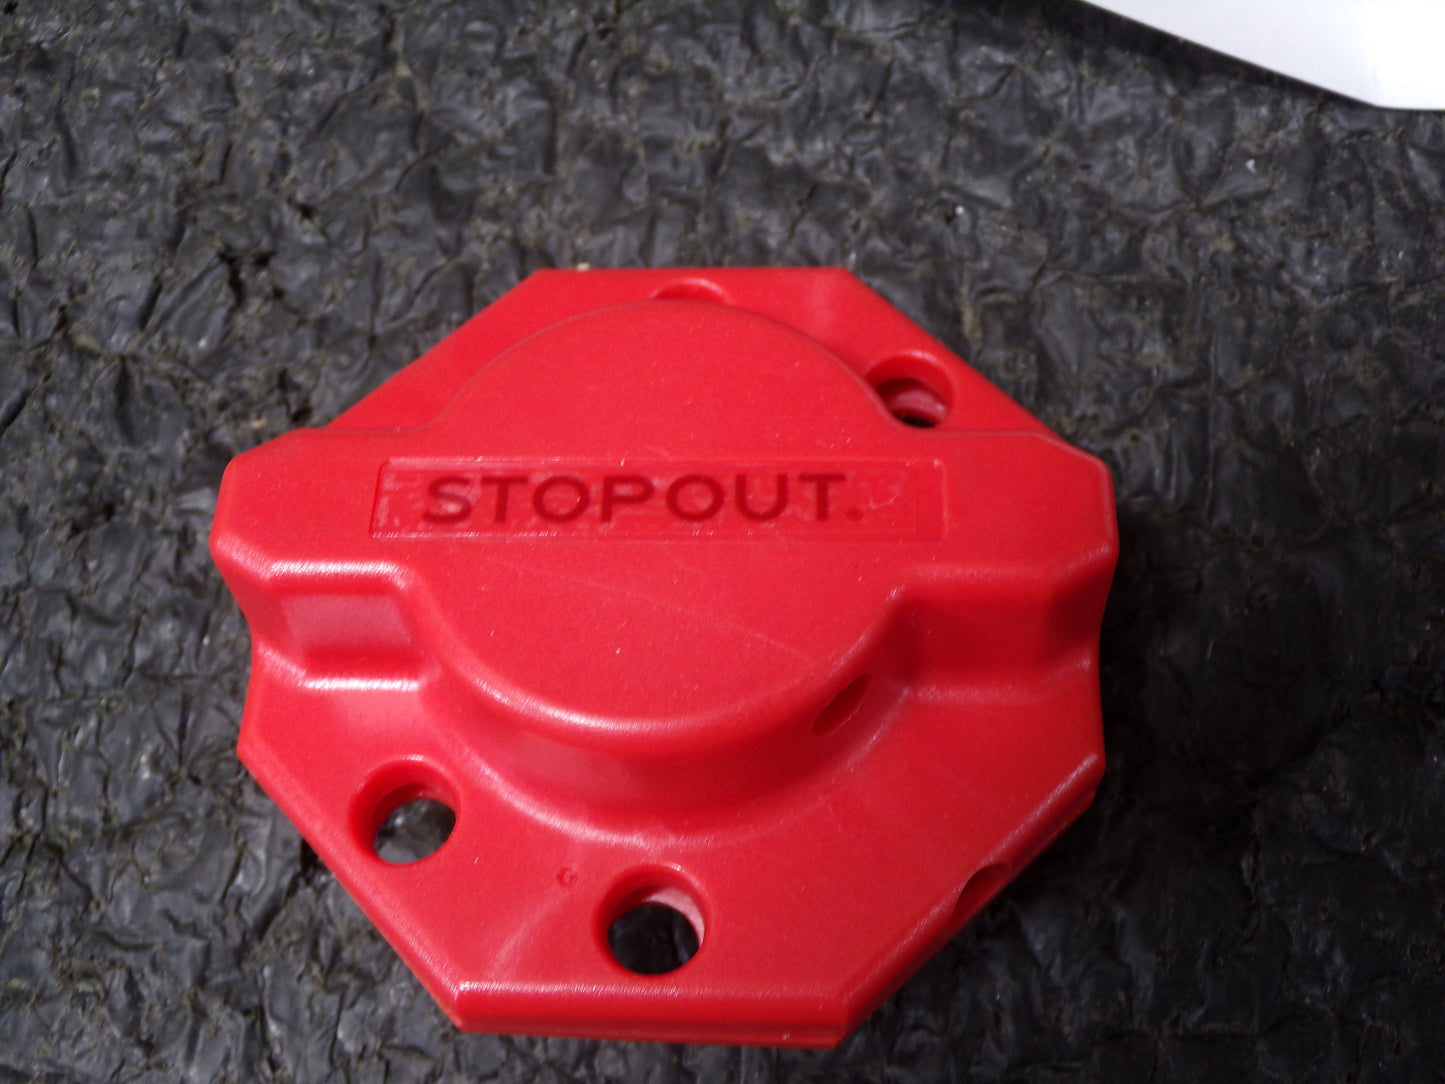 STOPOUT Lockout Cable, Red, Max No. Padlocks 4, Plastic (CR00355-BT21)